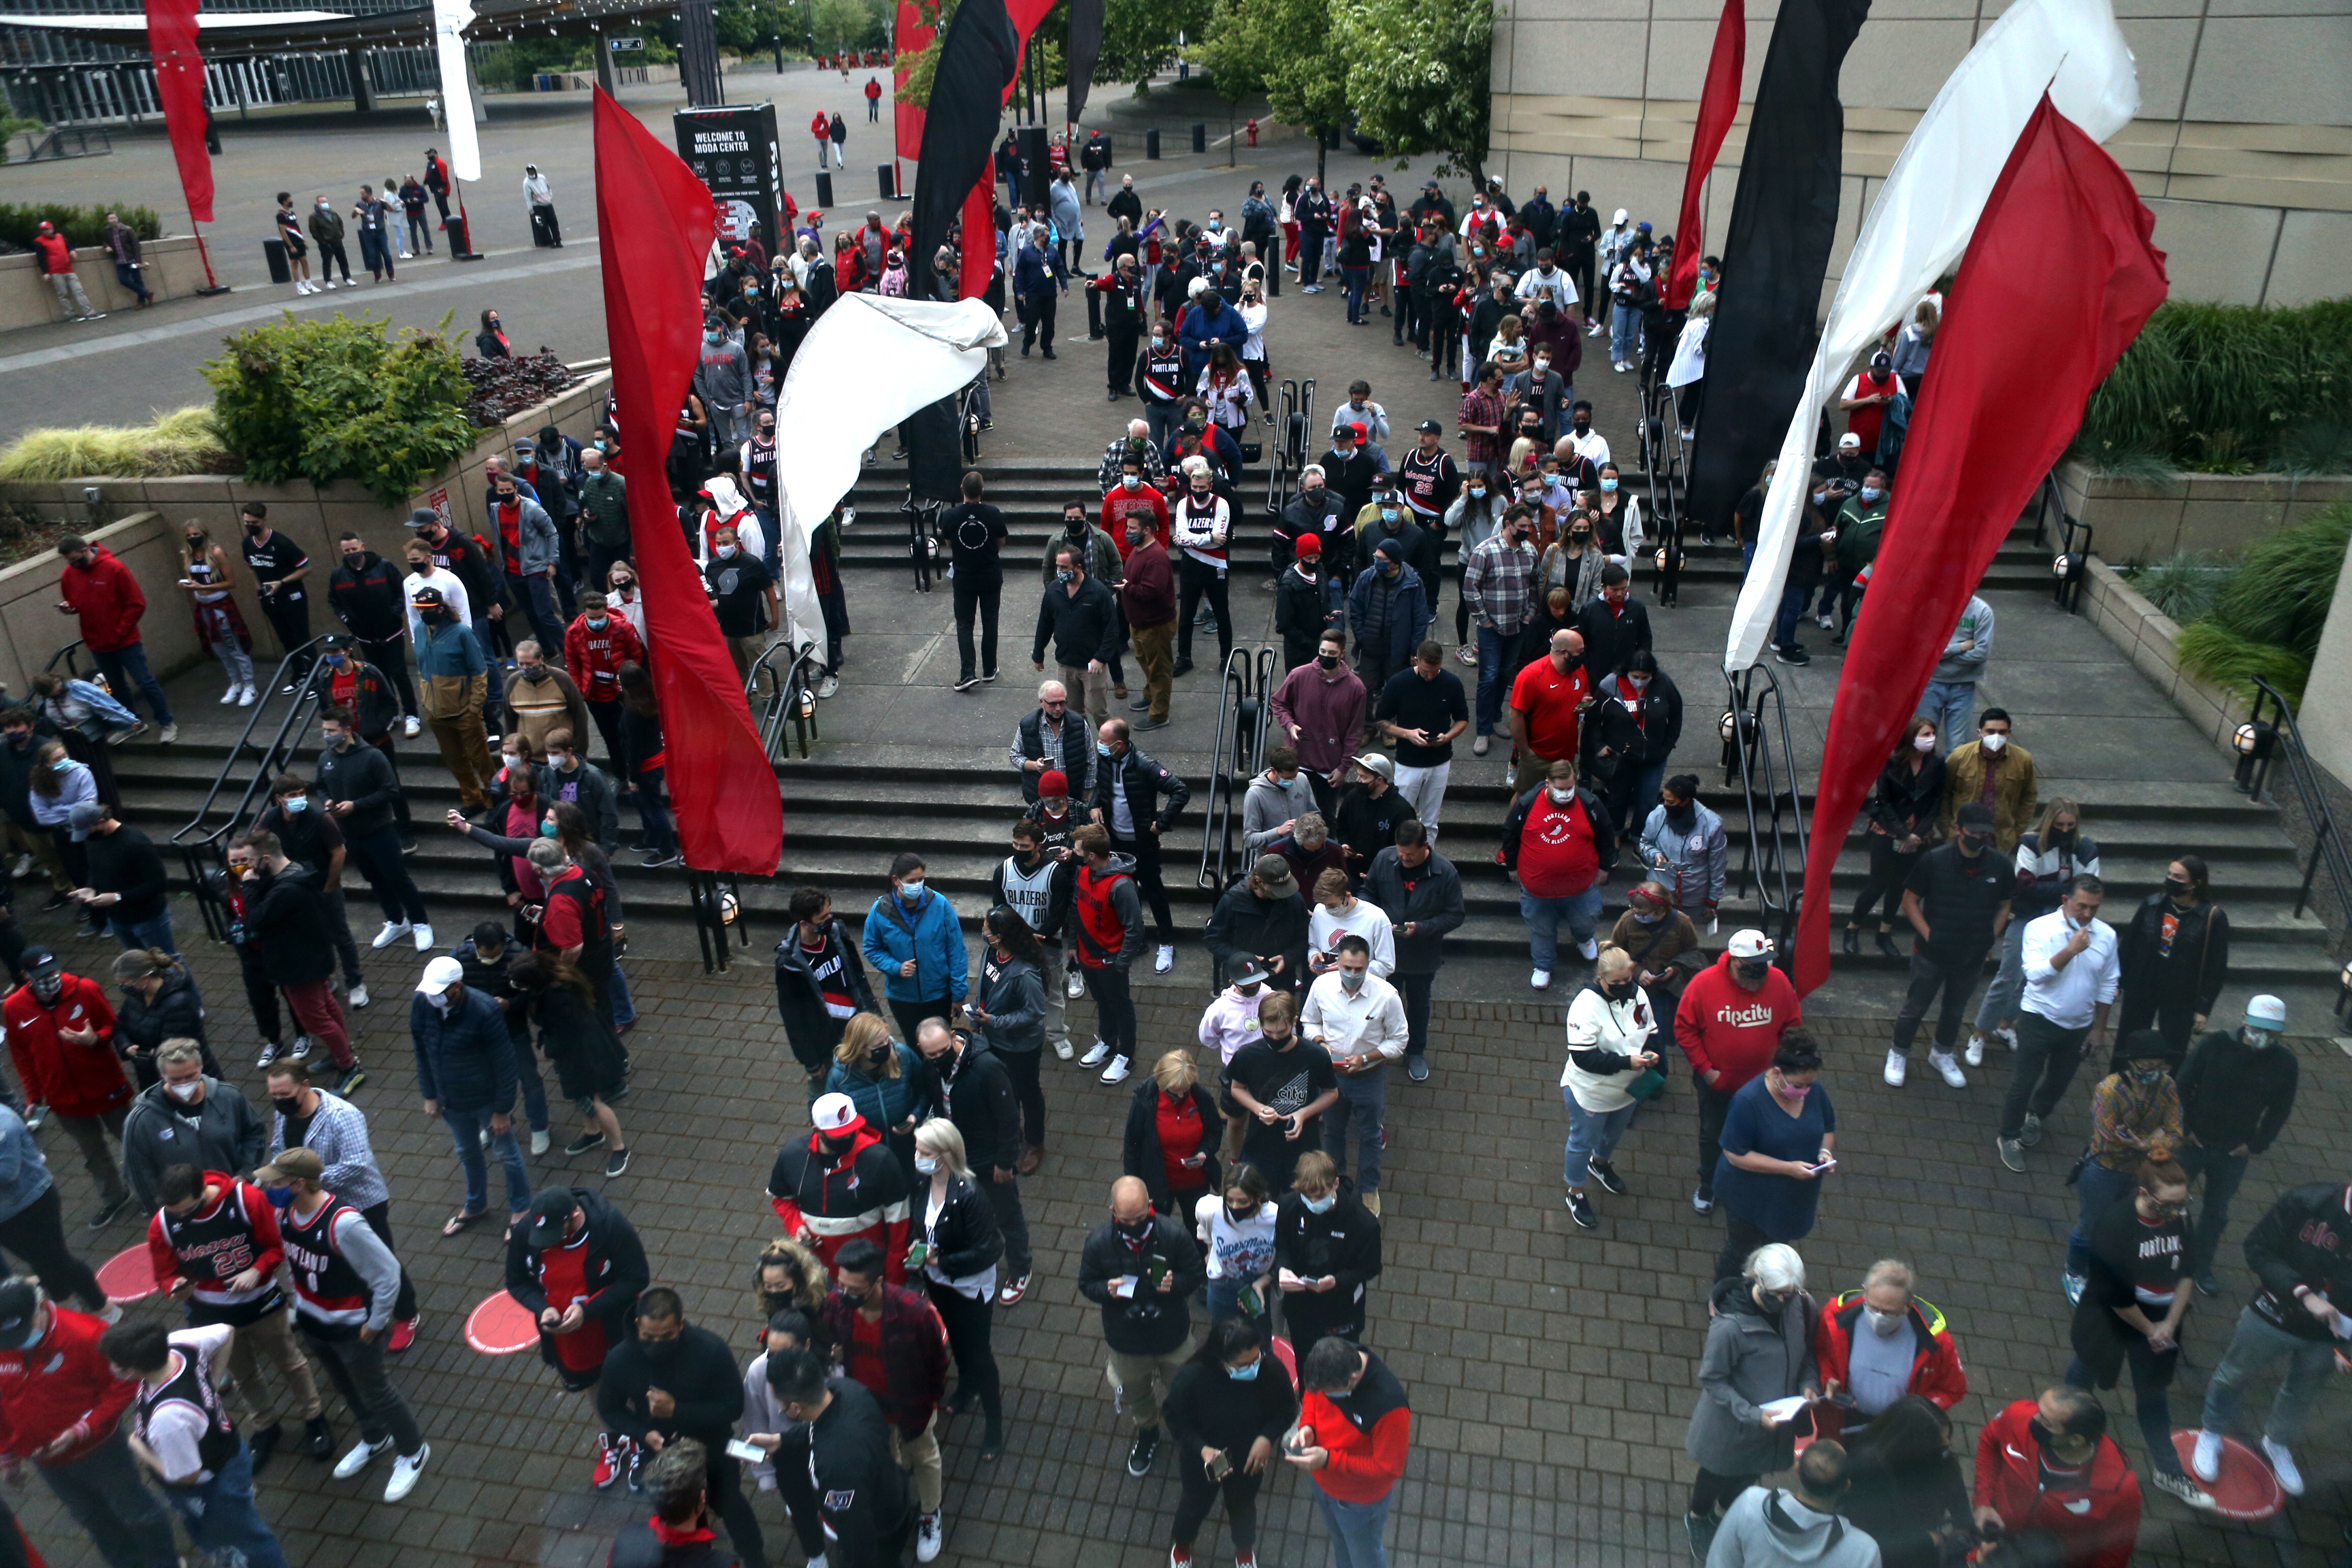 Portland Trail Blazers granted fan capacity increase to 10,000 for Game 6  vs. Denver 